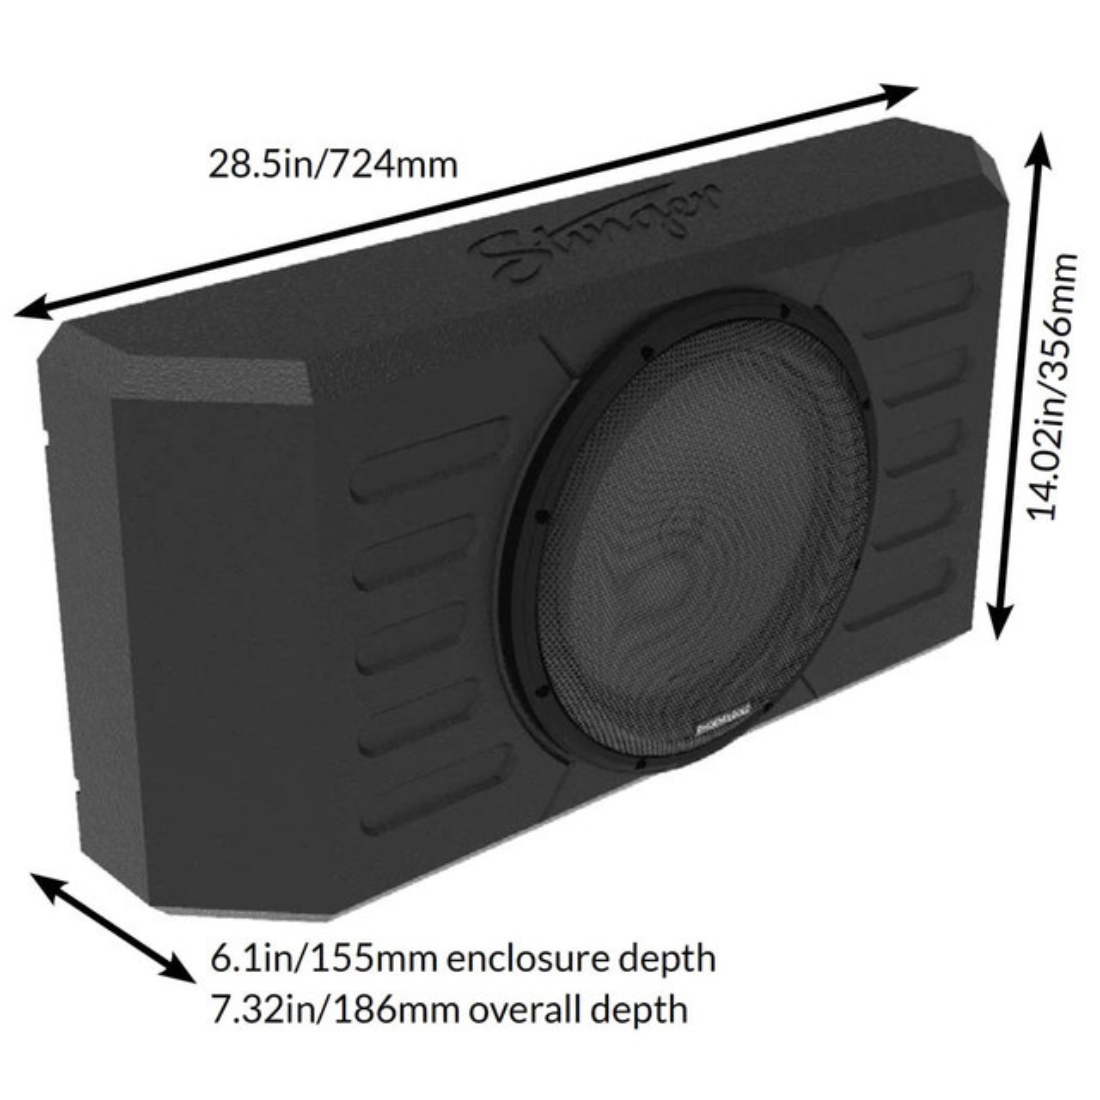 Stinger TXFBB12 12" 800W Max Swing Gate Subwoofer Enclosure for Ford Bronco 2021